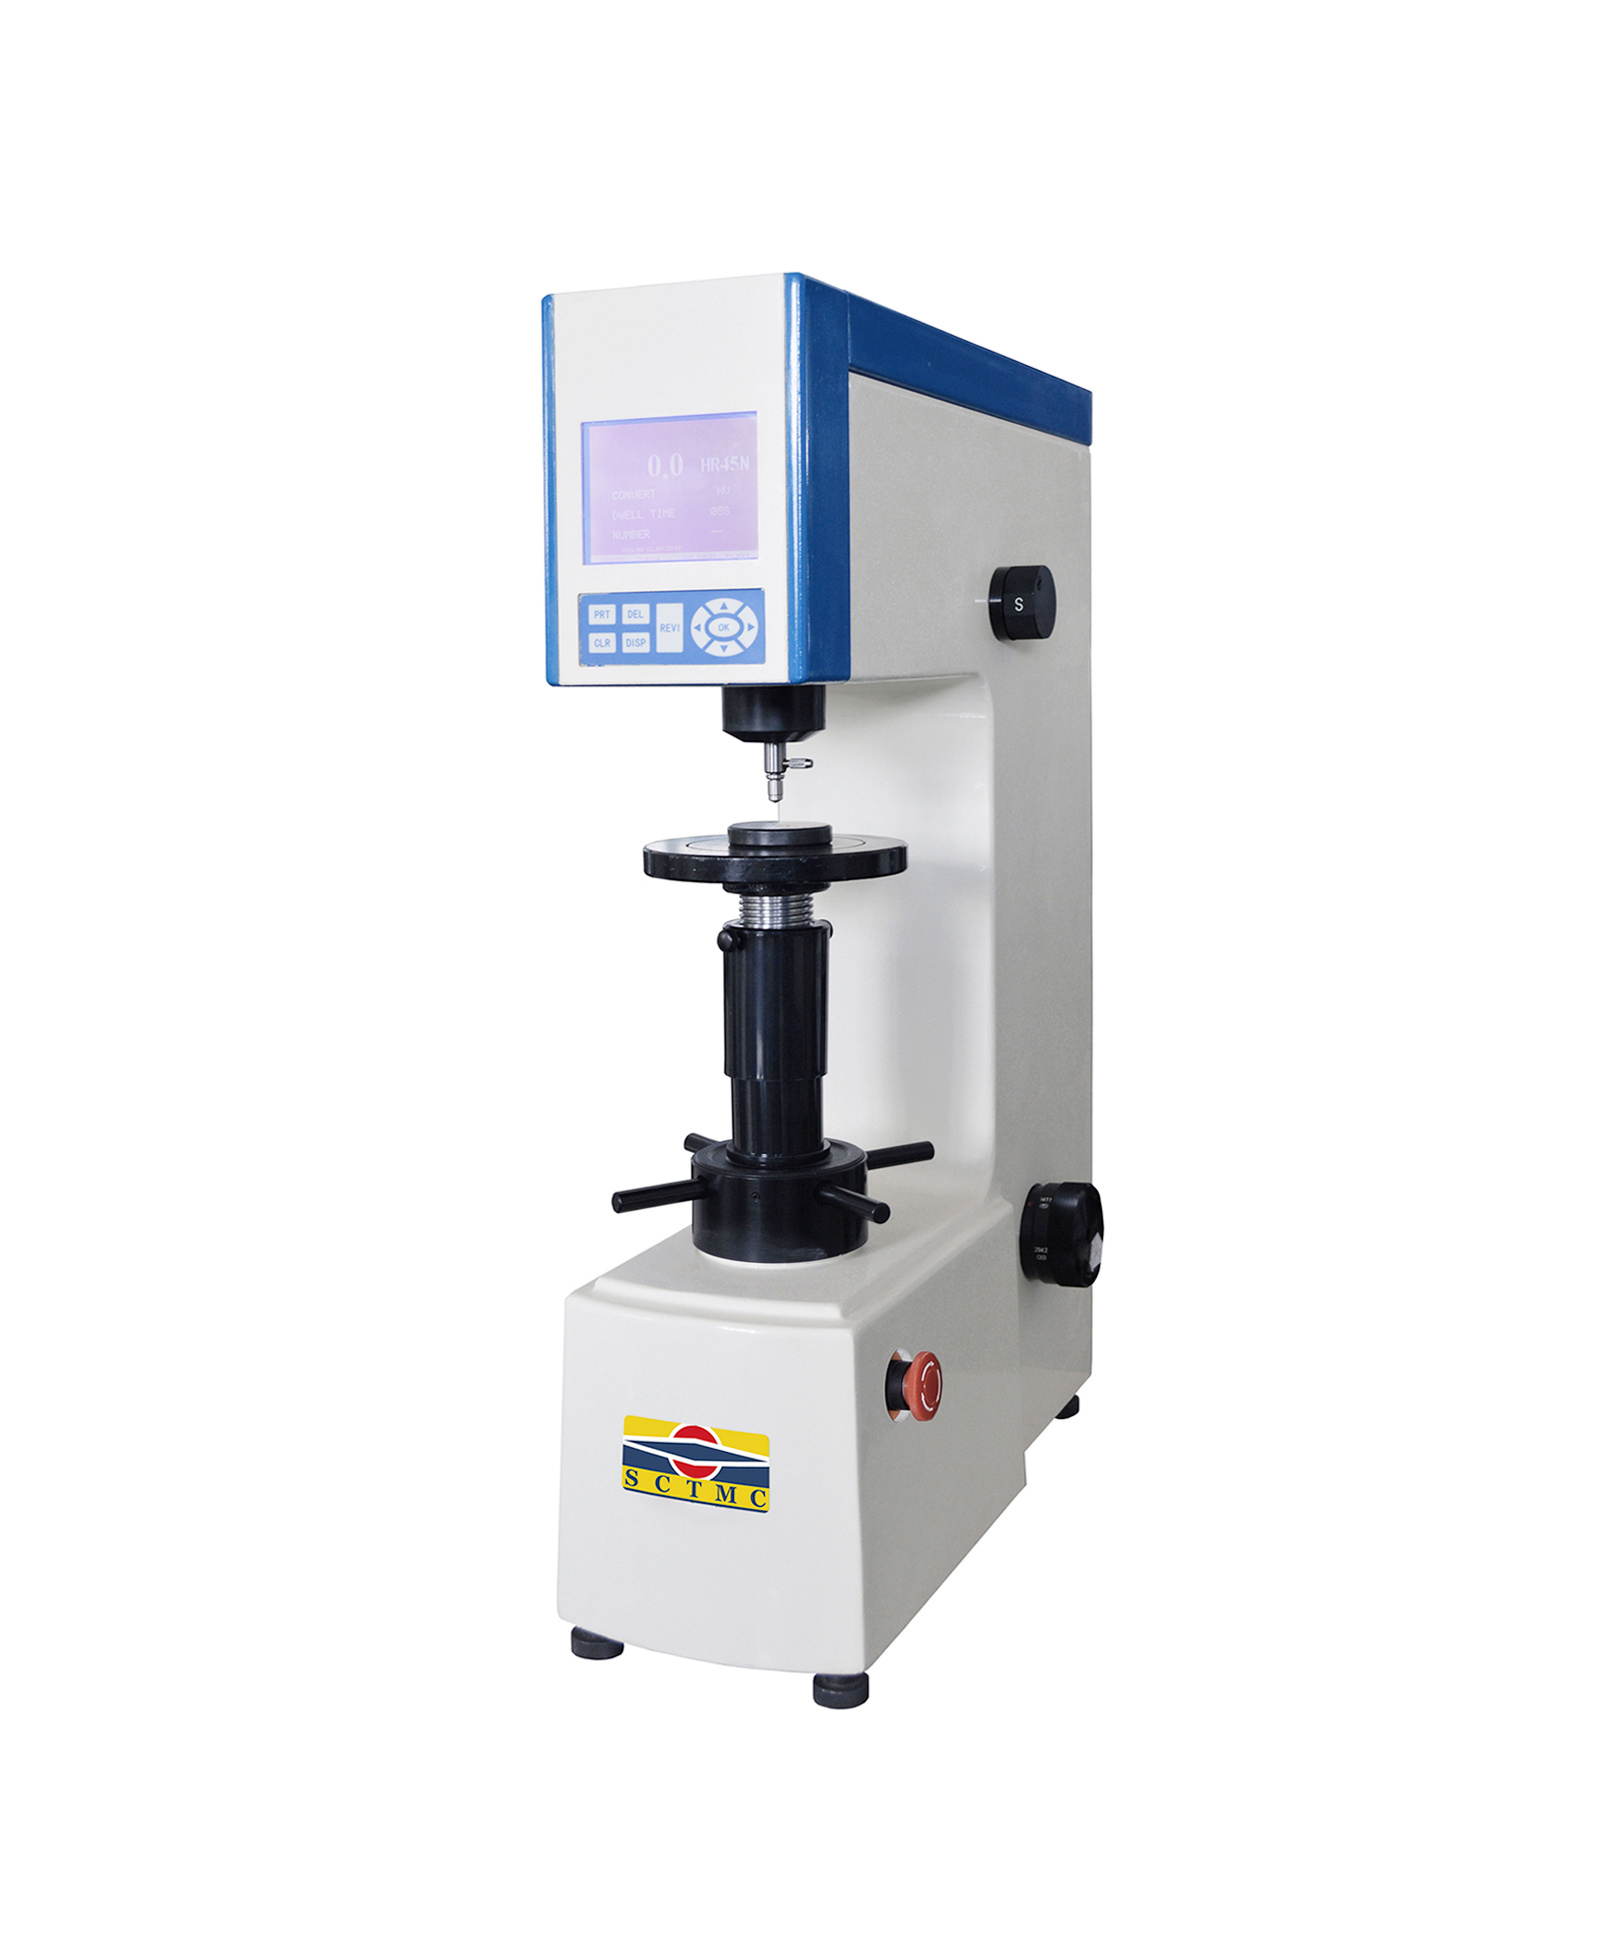 560RSS Digital Double Rockwell Hardness Tester